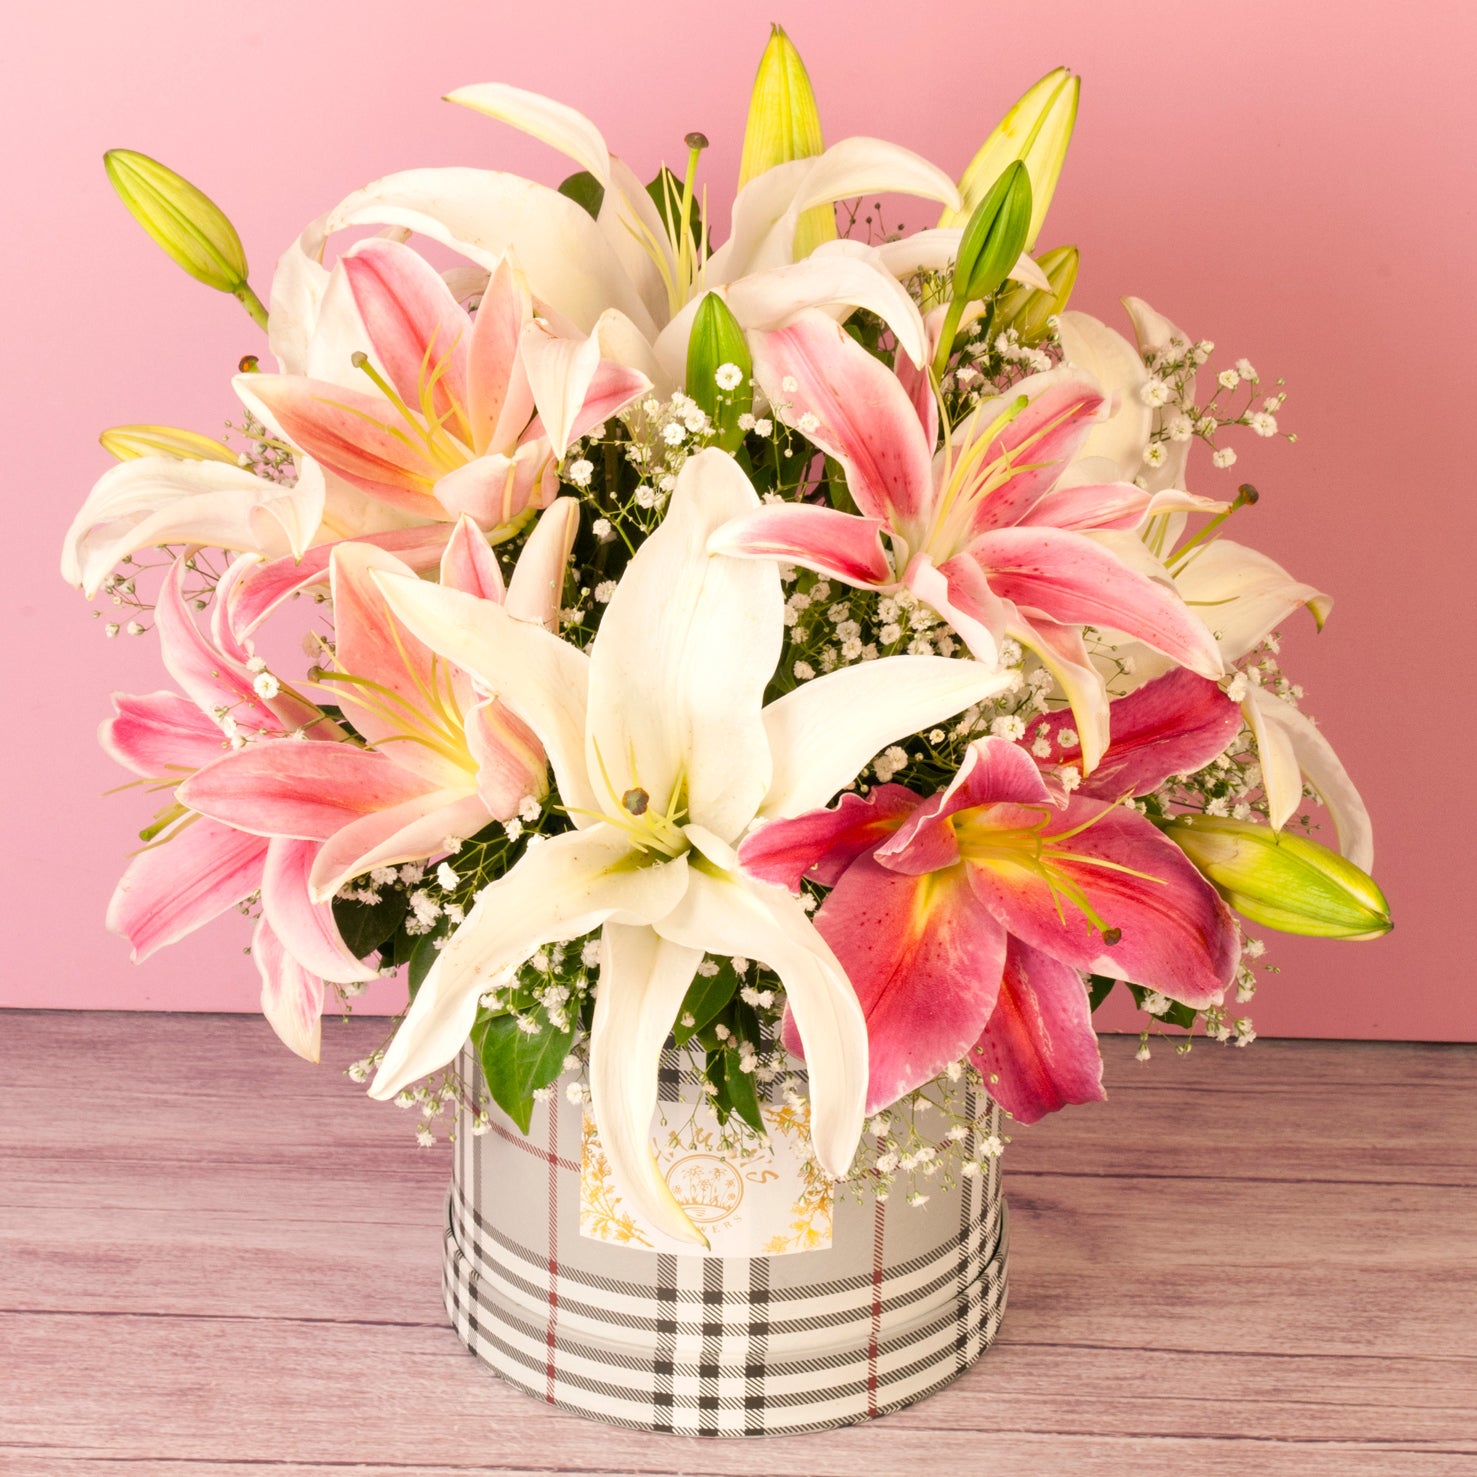 bouquet delivery online - beautiful pink and white lilies